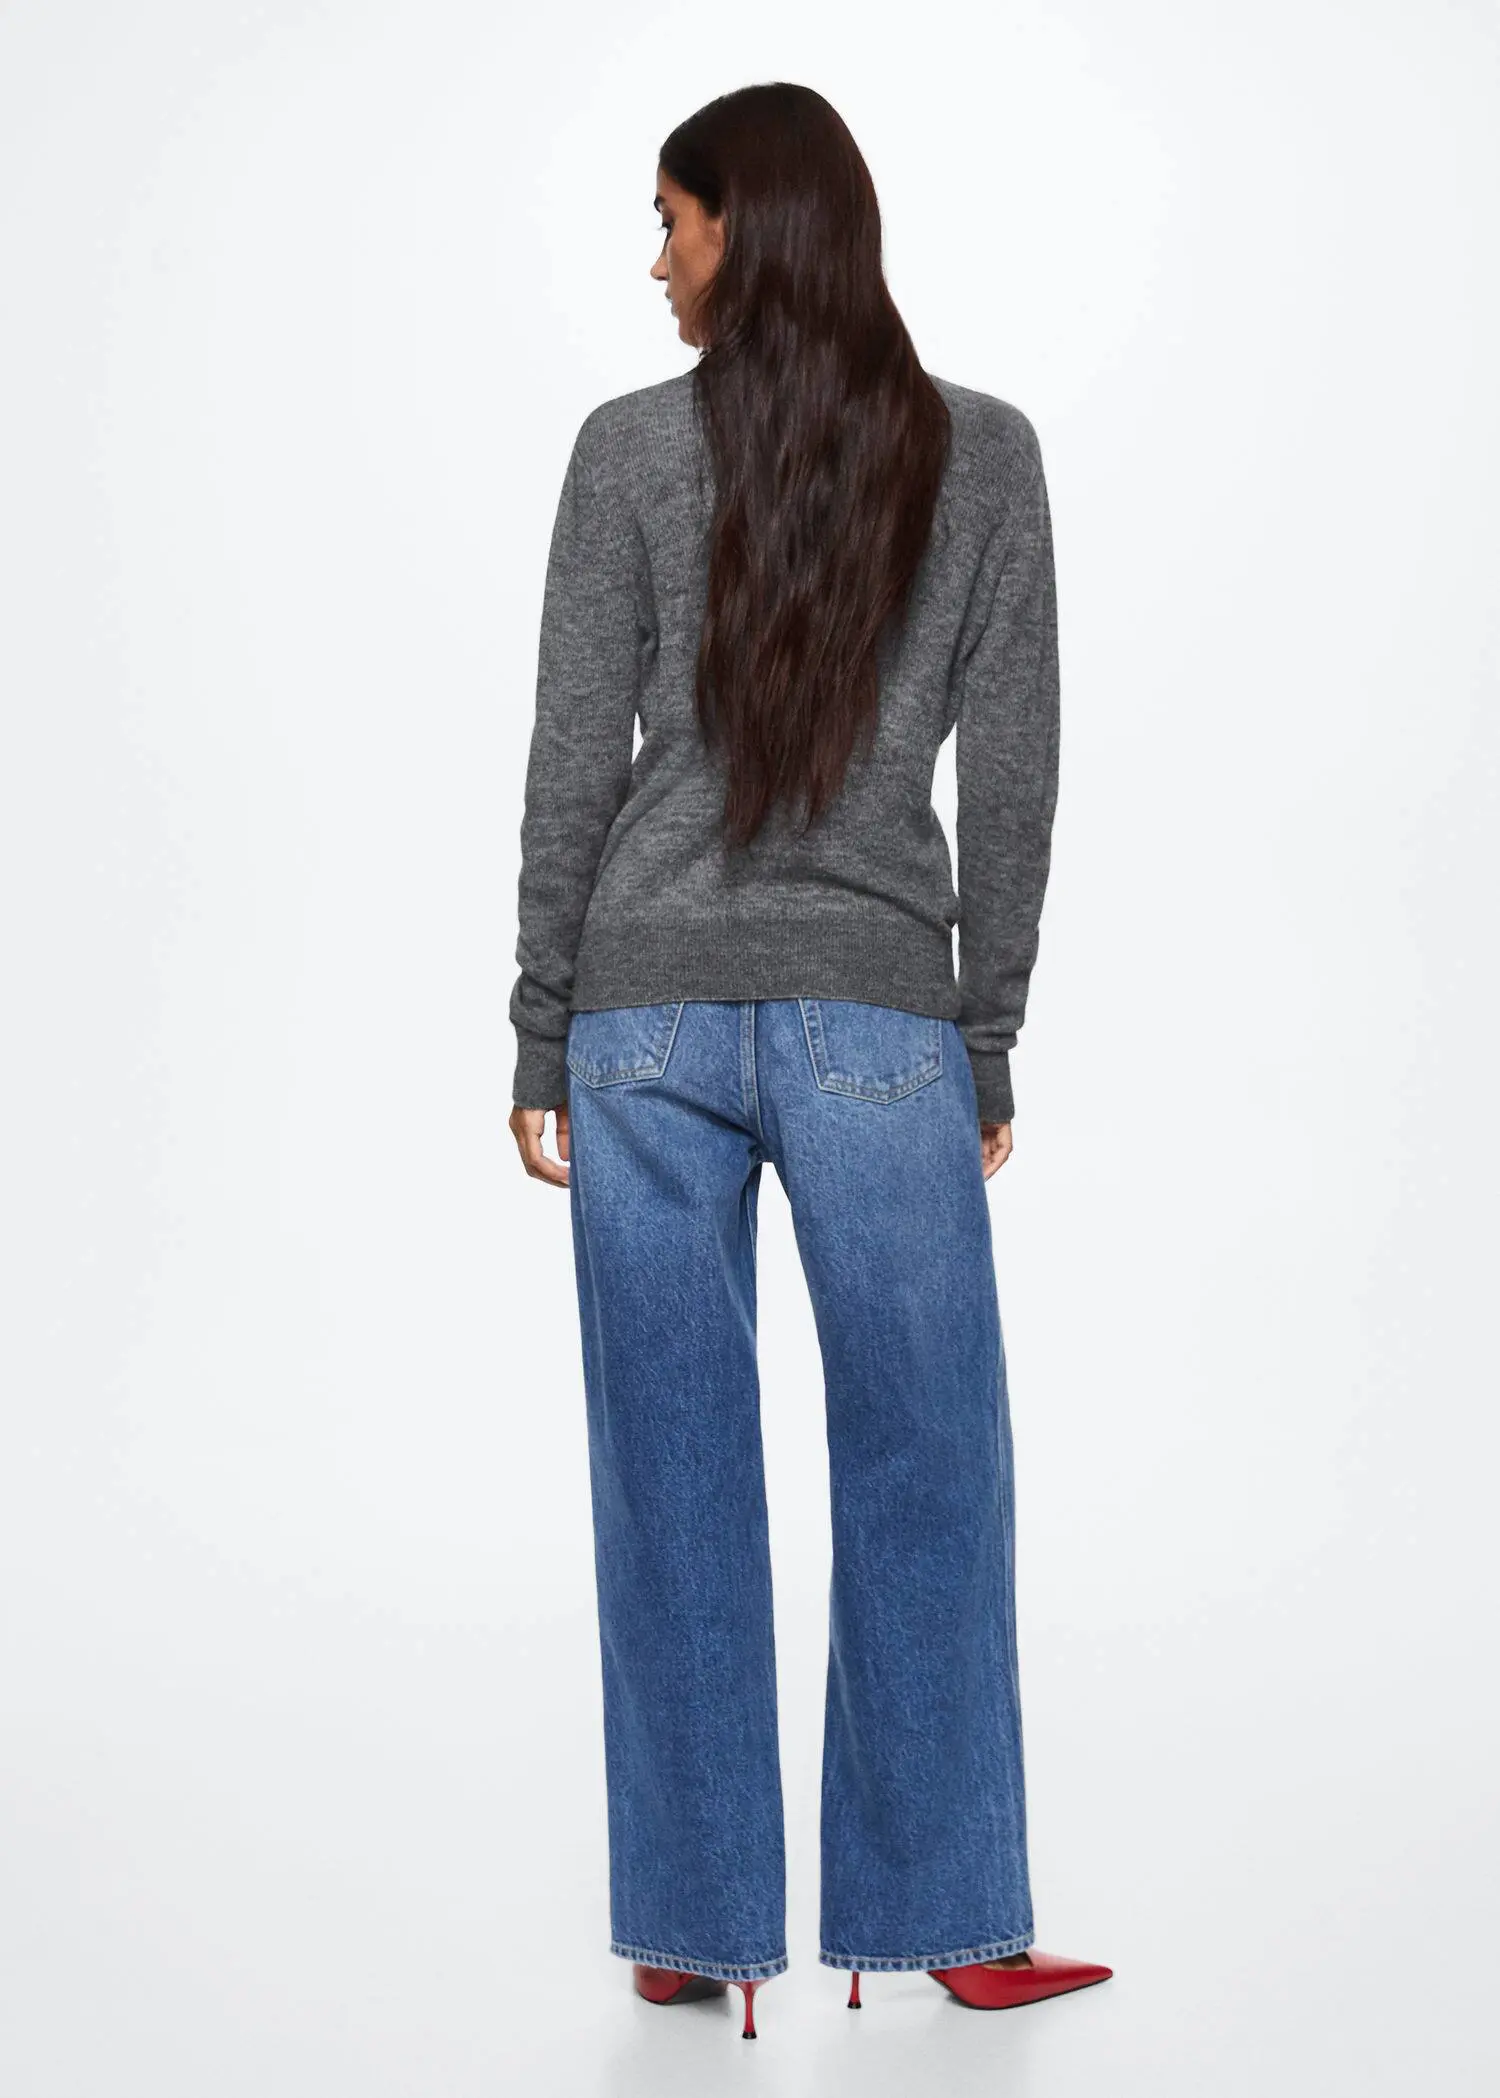 Mango Turtle neck sweater. a woman with long black hair standing in front of a white wall. 